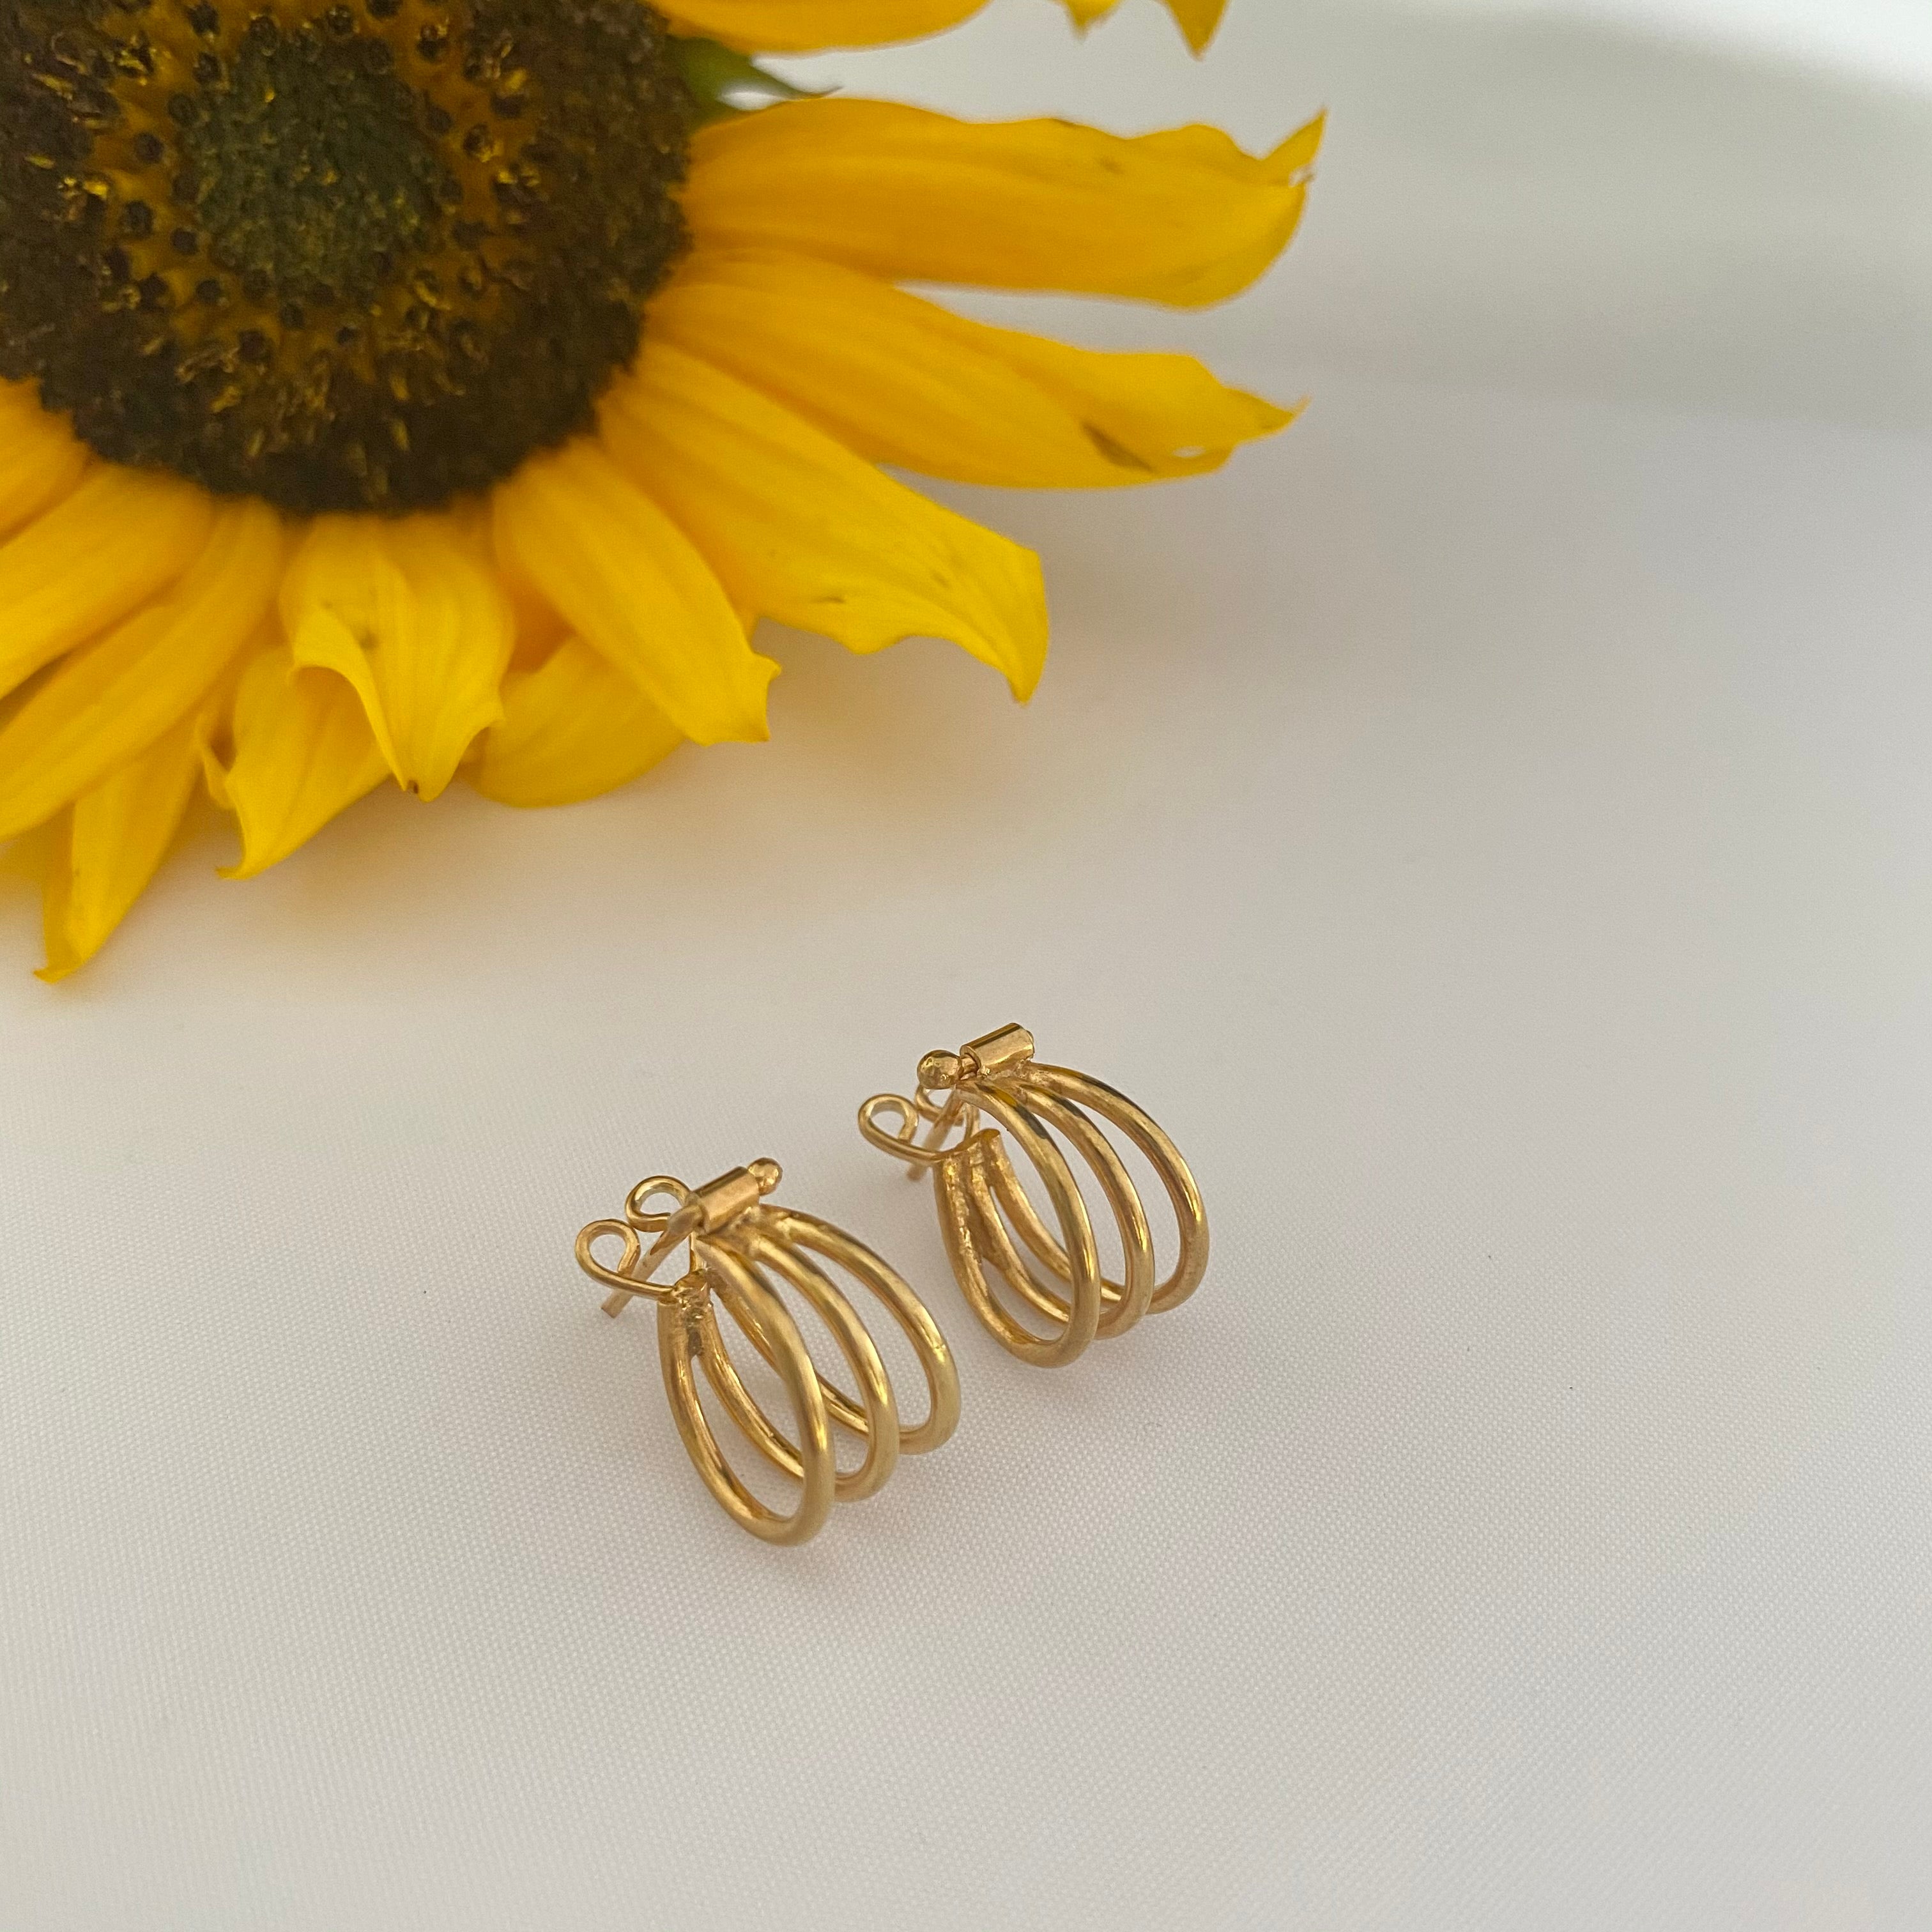 Small Triple Ring Gold Plated Sterling Silver Hoop Earrings